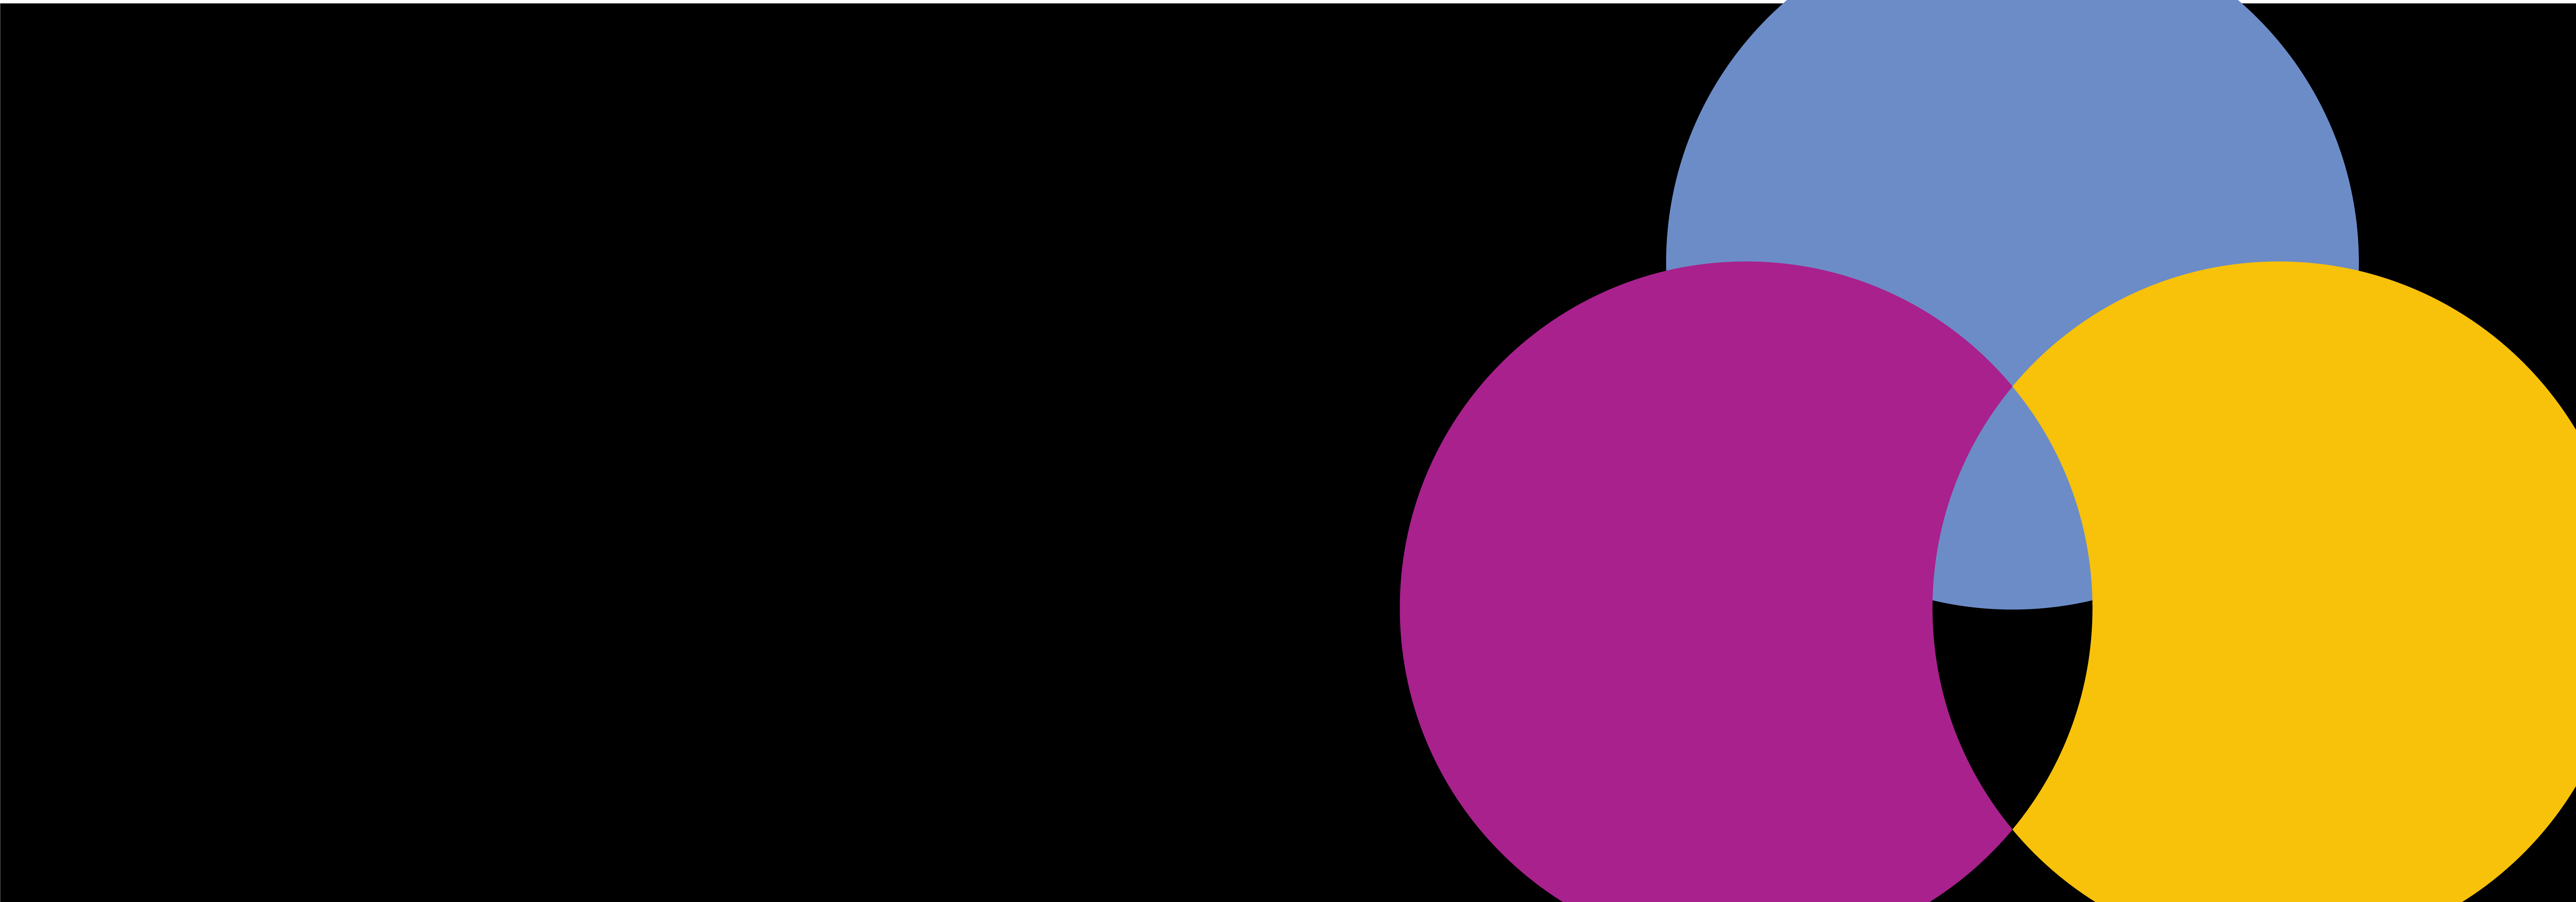 Graphic of three interlocking circles in pink, yellow and light purple on a black background